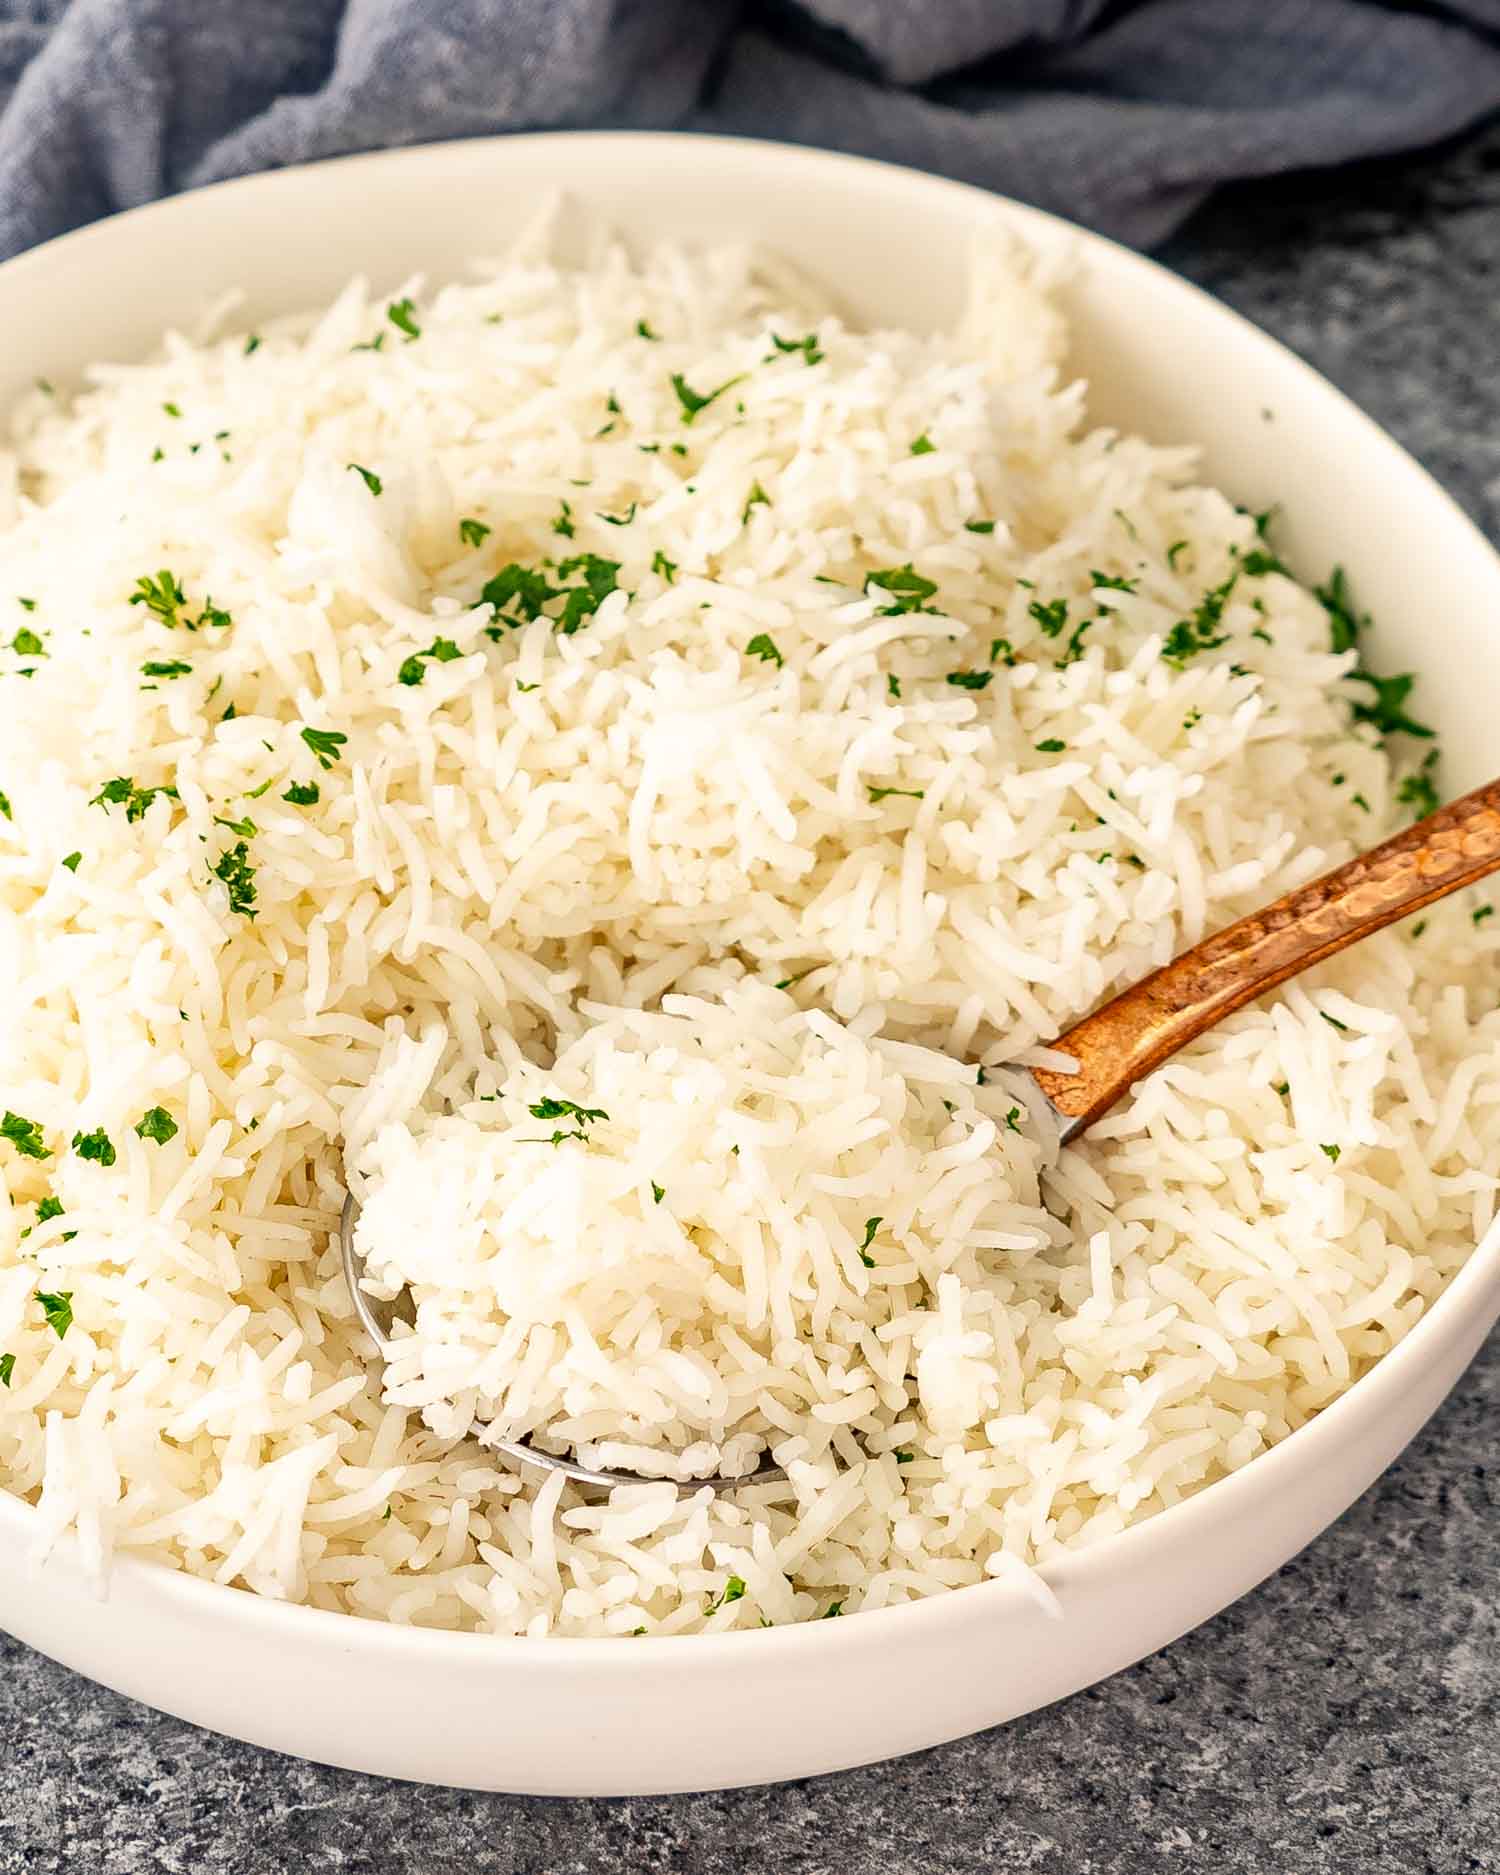 freshly cooked basmati rice in a white bowl garnished with some fresh parsley.